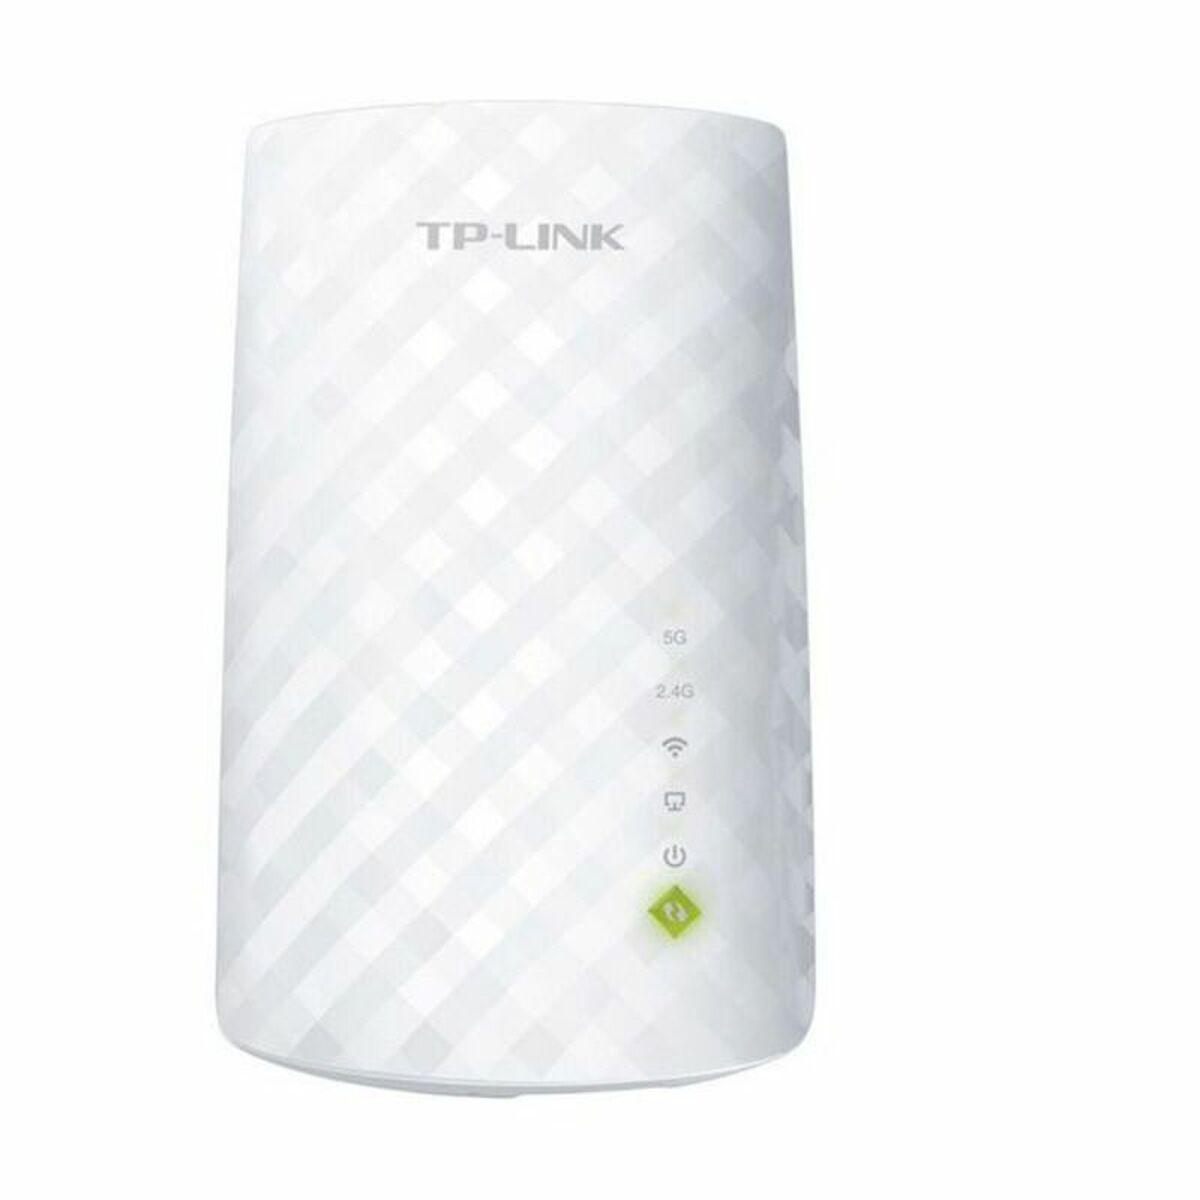 Repetor Wifi TP-Link RE200 AC750 5 GHz 433 Mbps